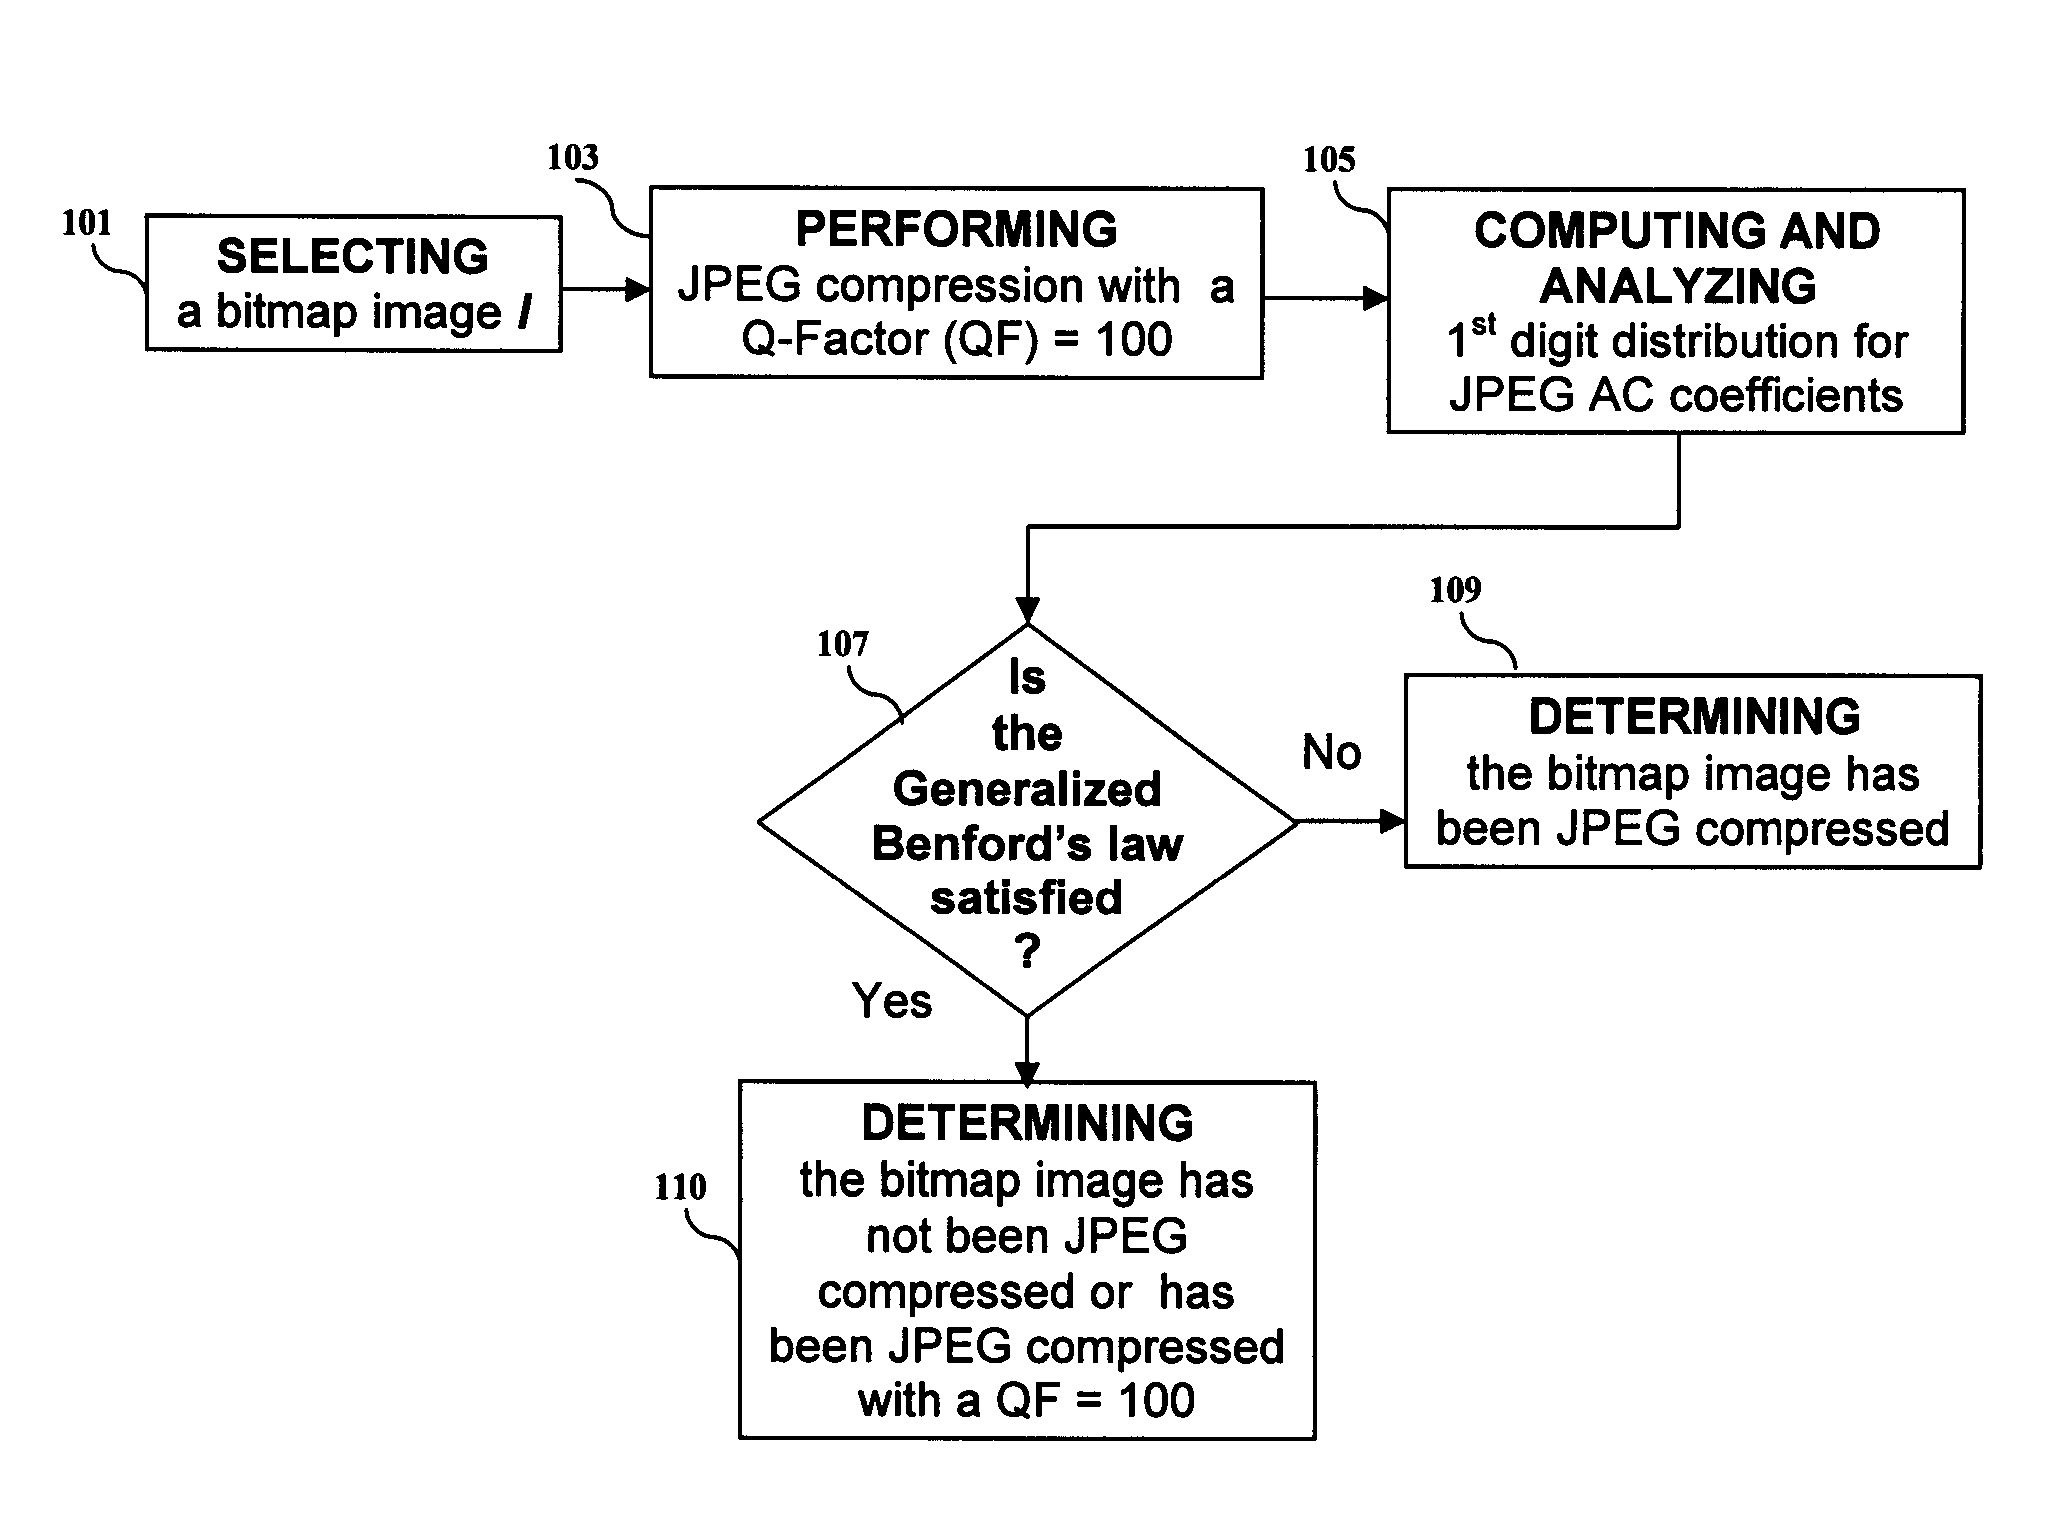 Apparatus and method for a generalized benford's law analysis of DCT and JPEG coefficients